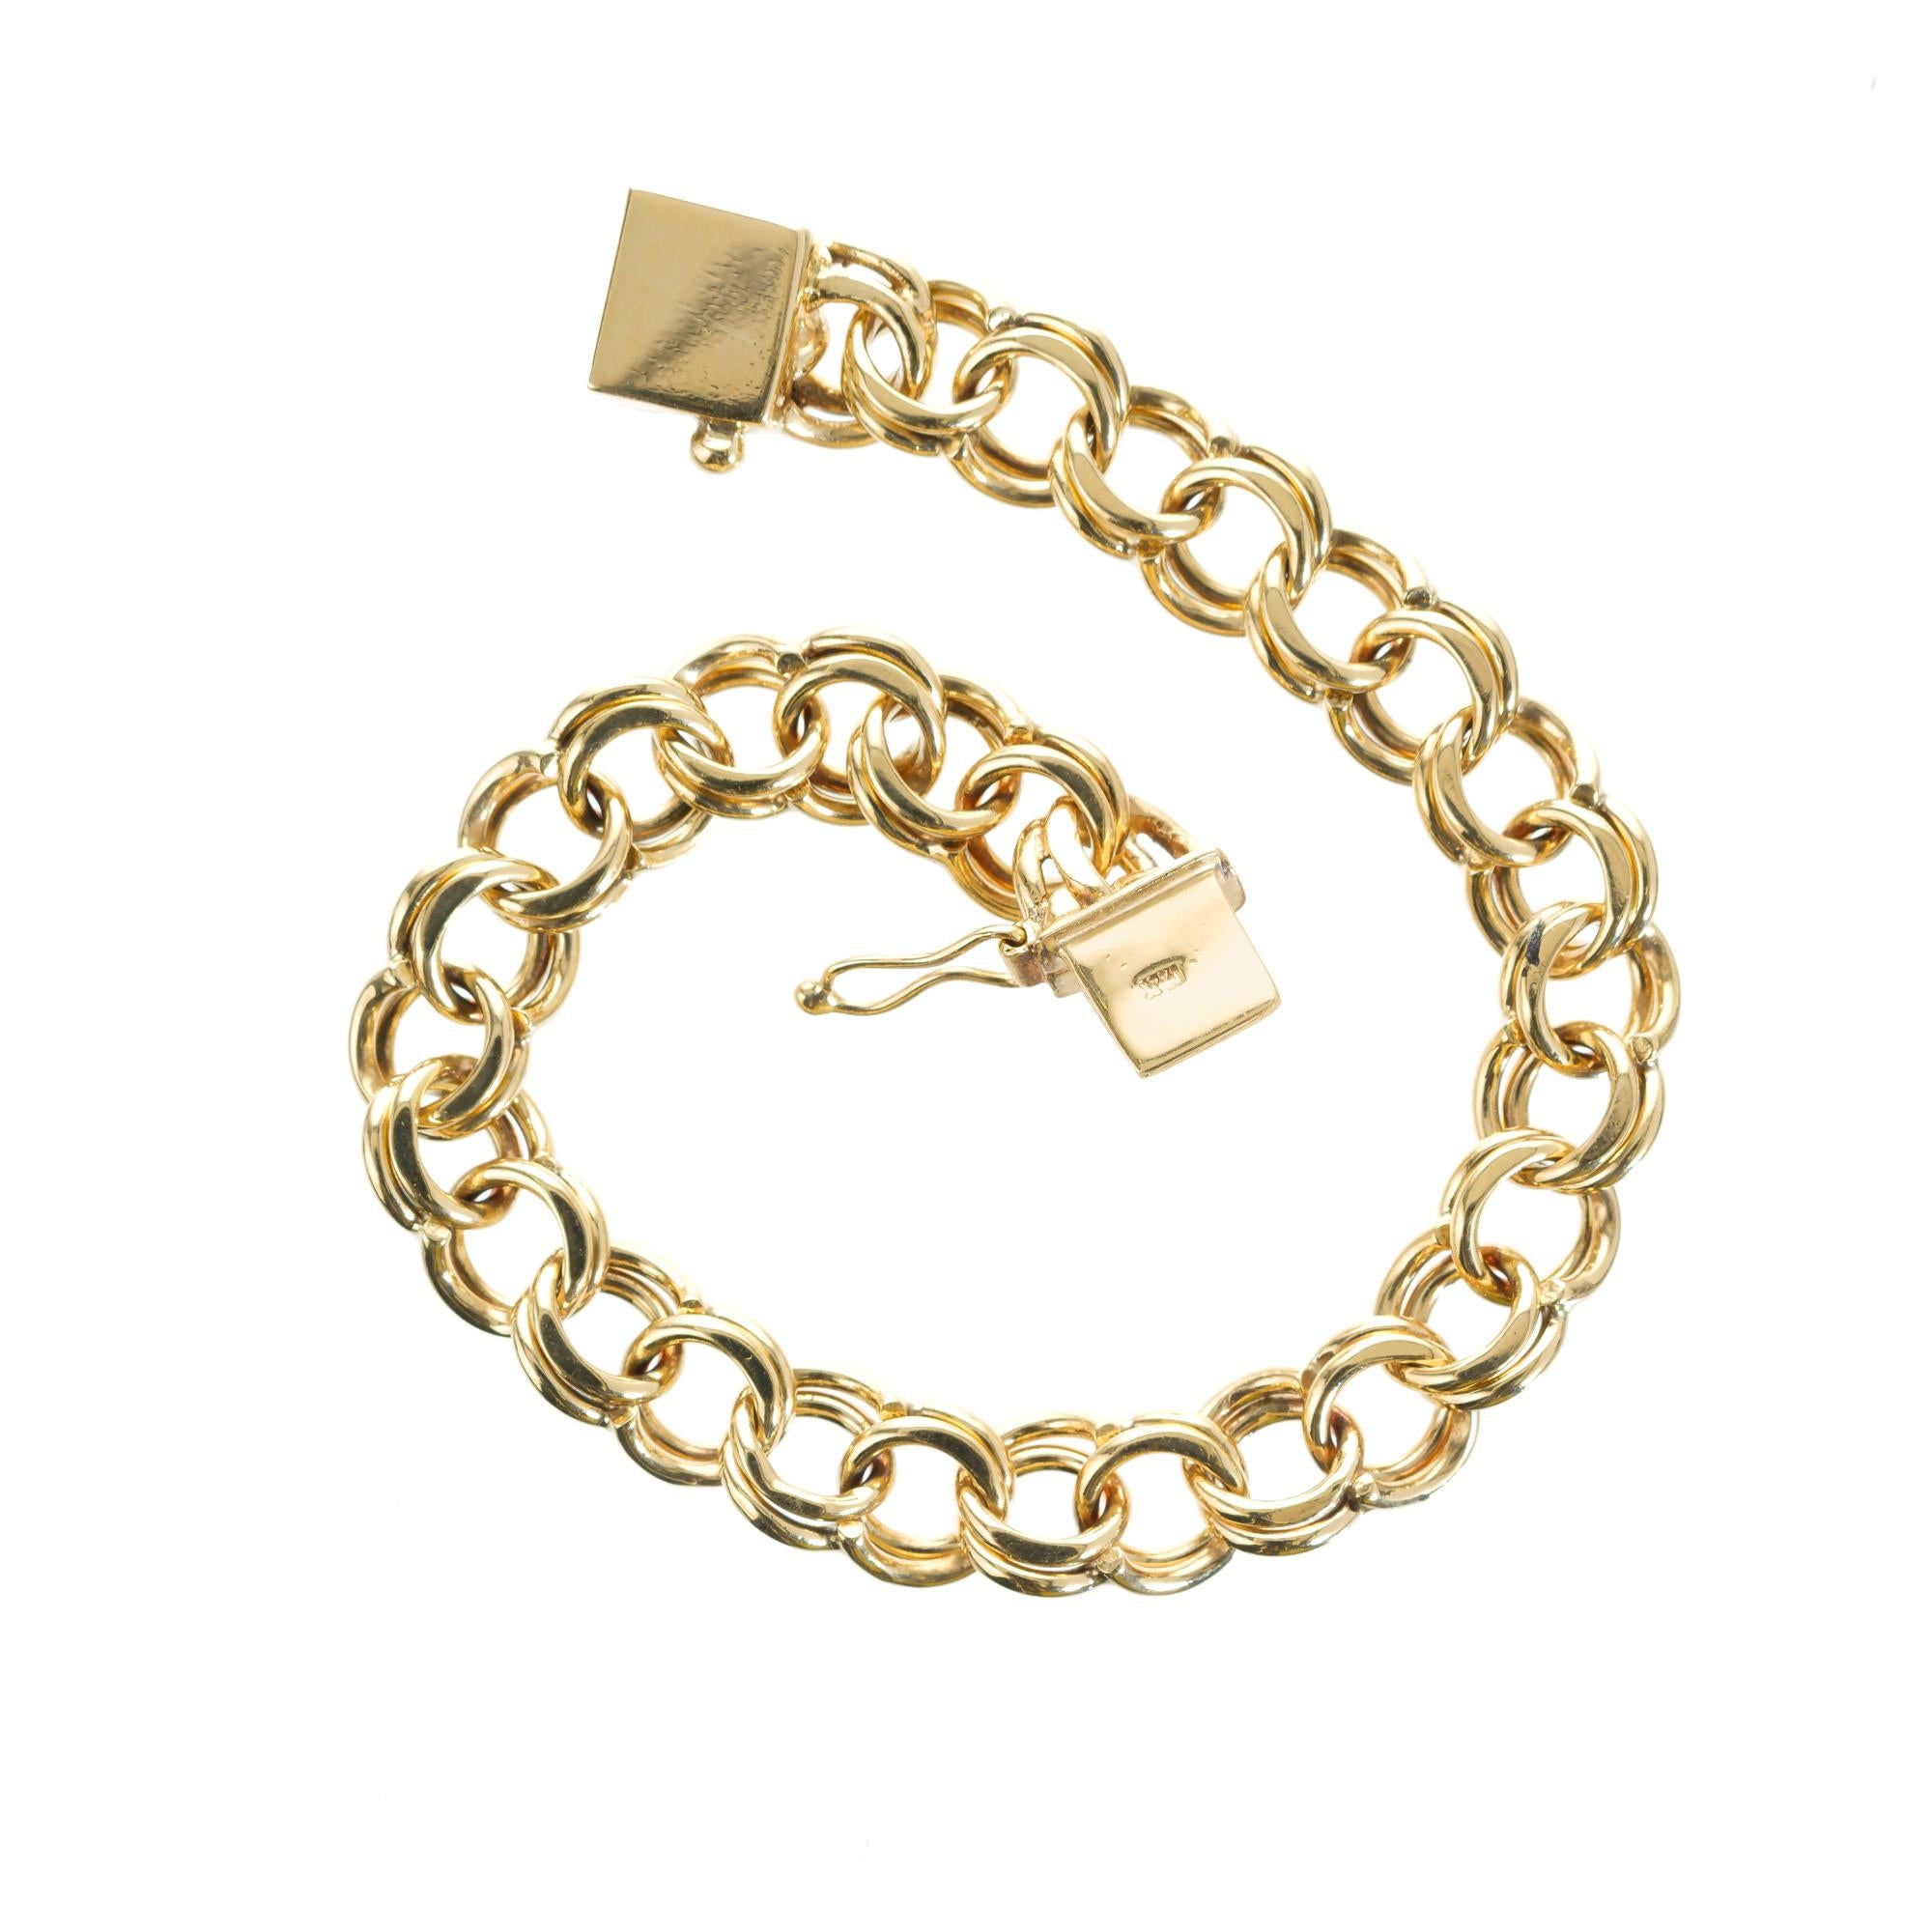 14k yellow gold double line solid charm bracelet, high polished with a box clasp and figure 8.   7.25 inches in length. 

Tested: 14k
Stamped: 14k
Weight: 23.5 grams
Length: 7.25
Width: 8.89mm 
Thickness/depth: 4.3